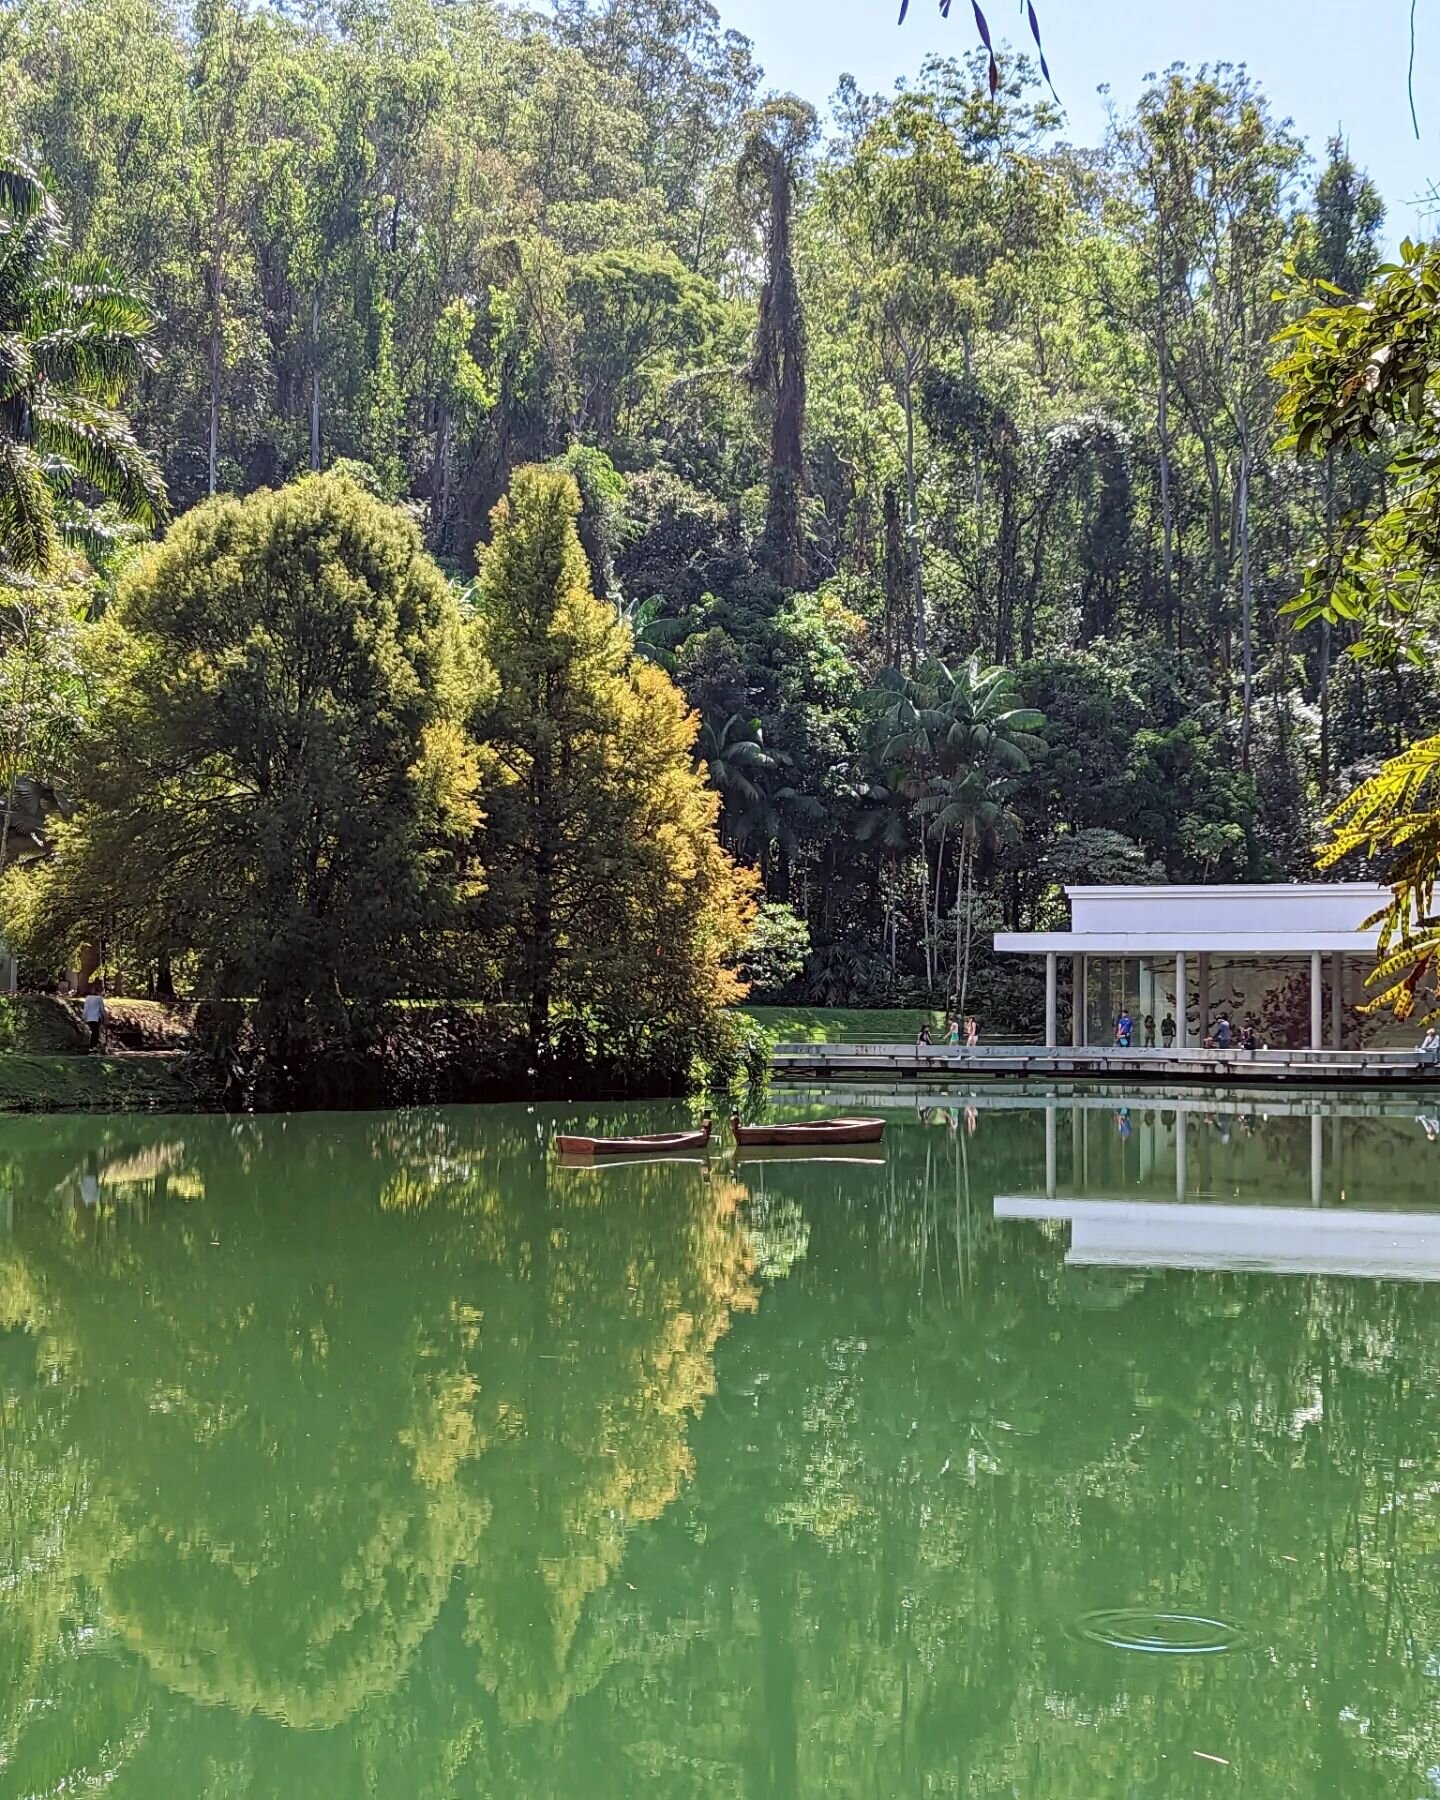 #Inhotim isn't your typical museum. It's an artistic wonderland sprawled across an expansive area of over 5,000 acres, being one of #LatinAmerica's most expansive outdoor art centers. Imagine strolling through tropical gardens, meandering around sere